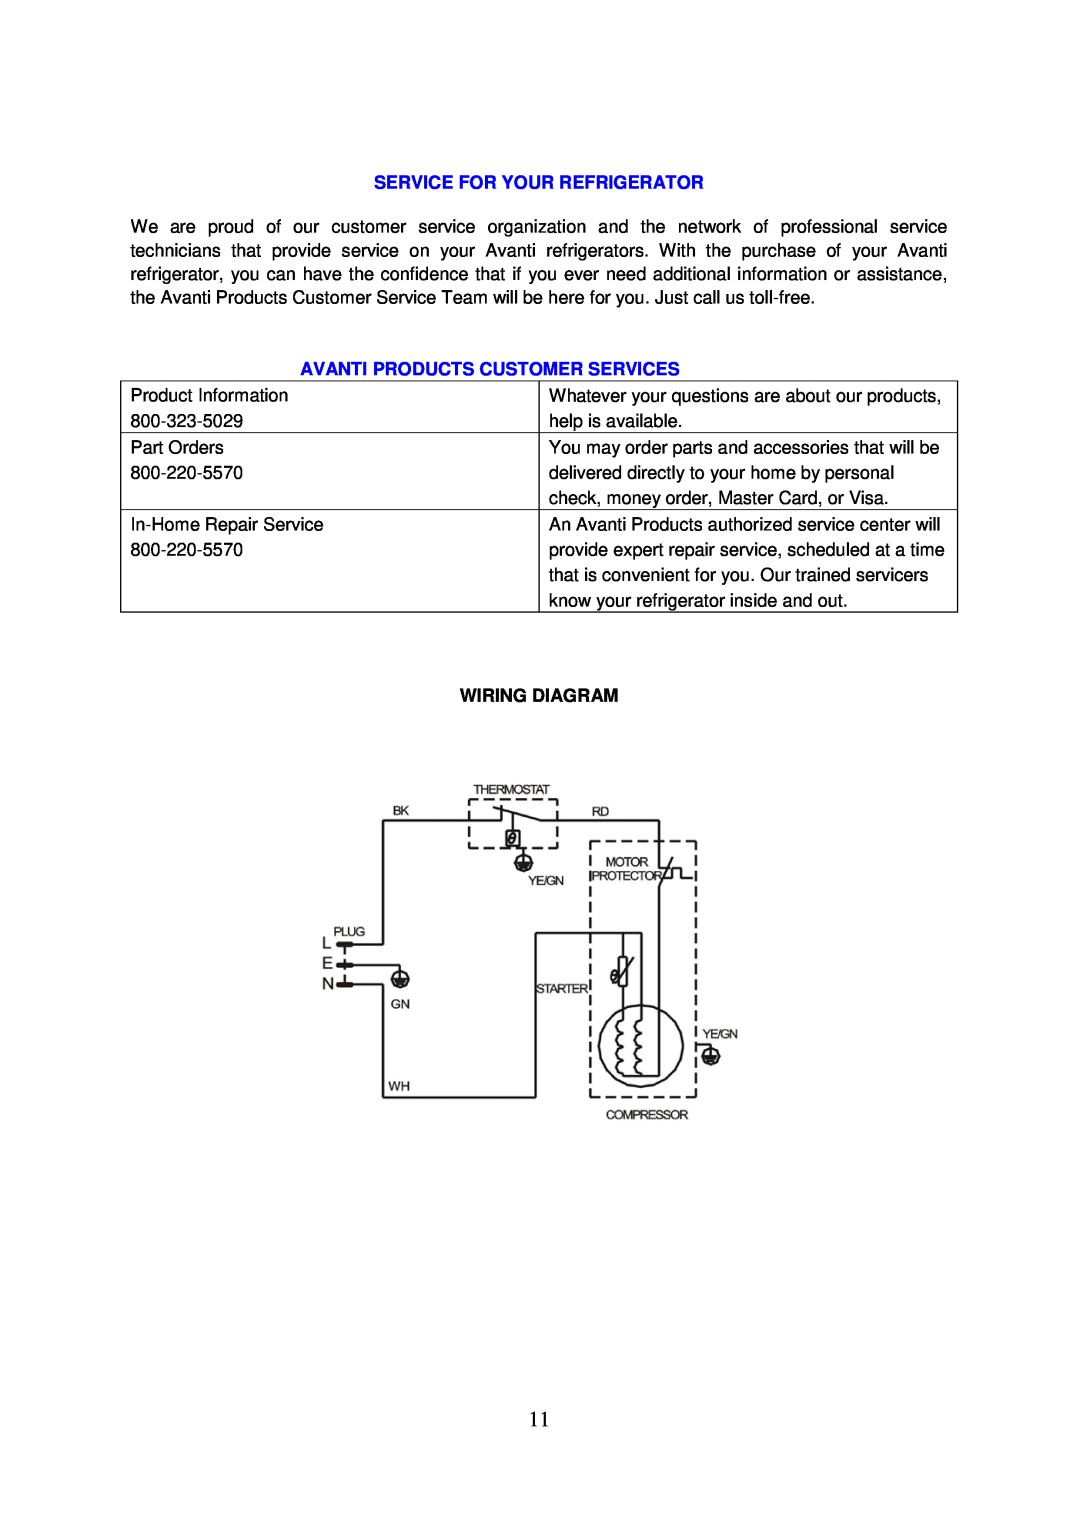 Avanti BCA3281B-1 instruction manual Service For Your Refrigerator, Avanti Products Customer Services, Wiring Diagram 